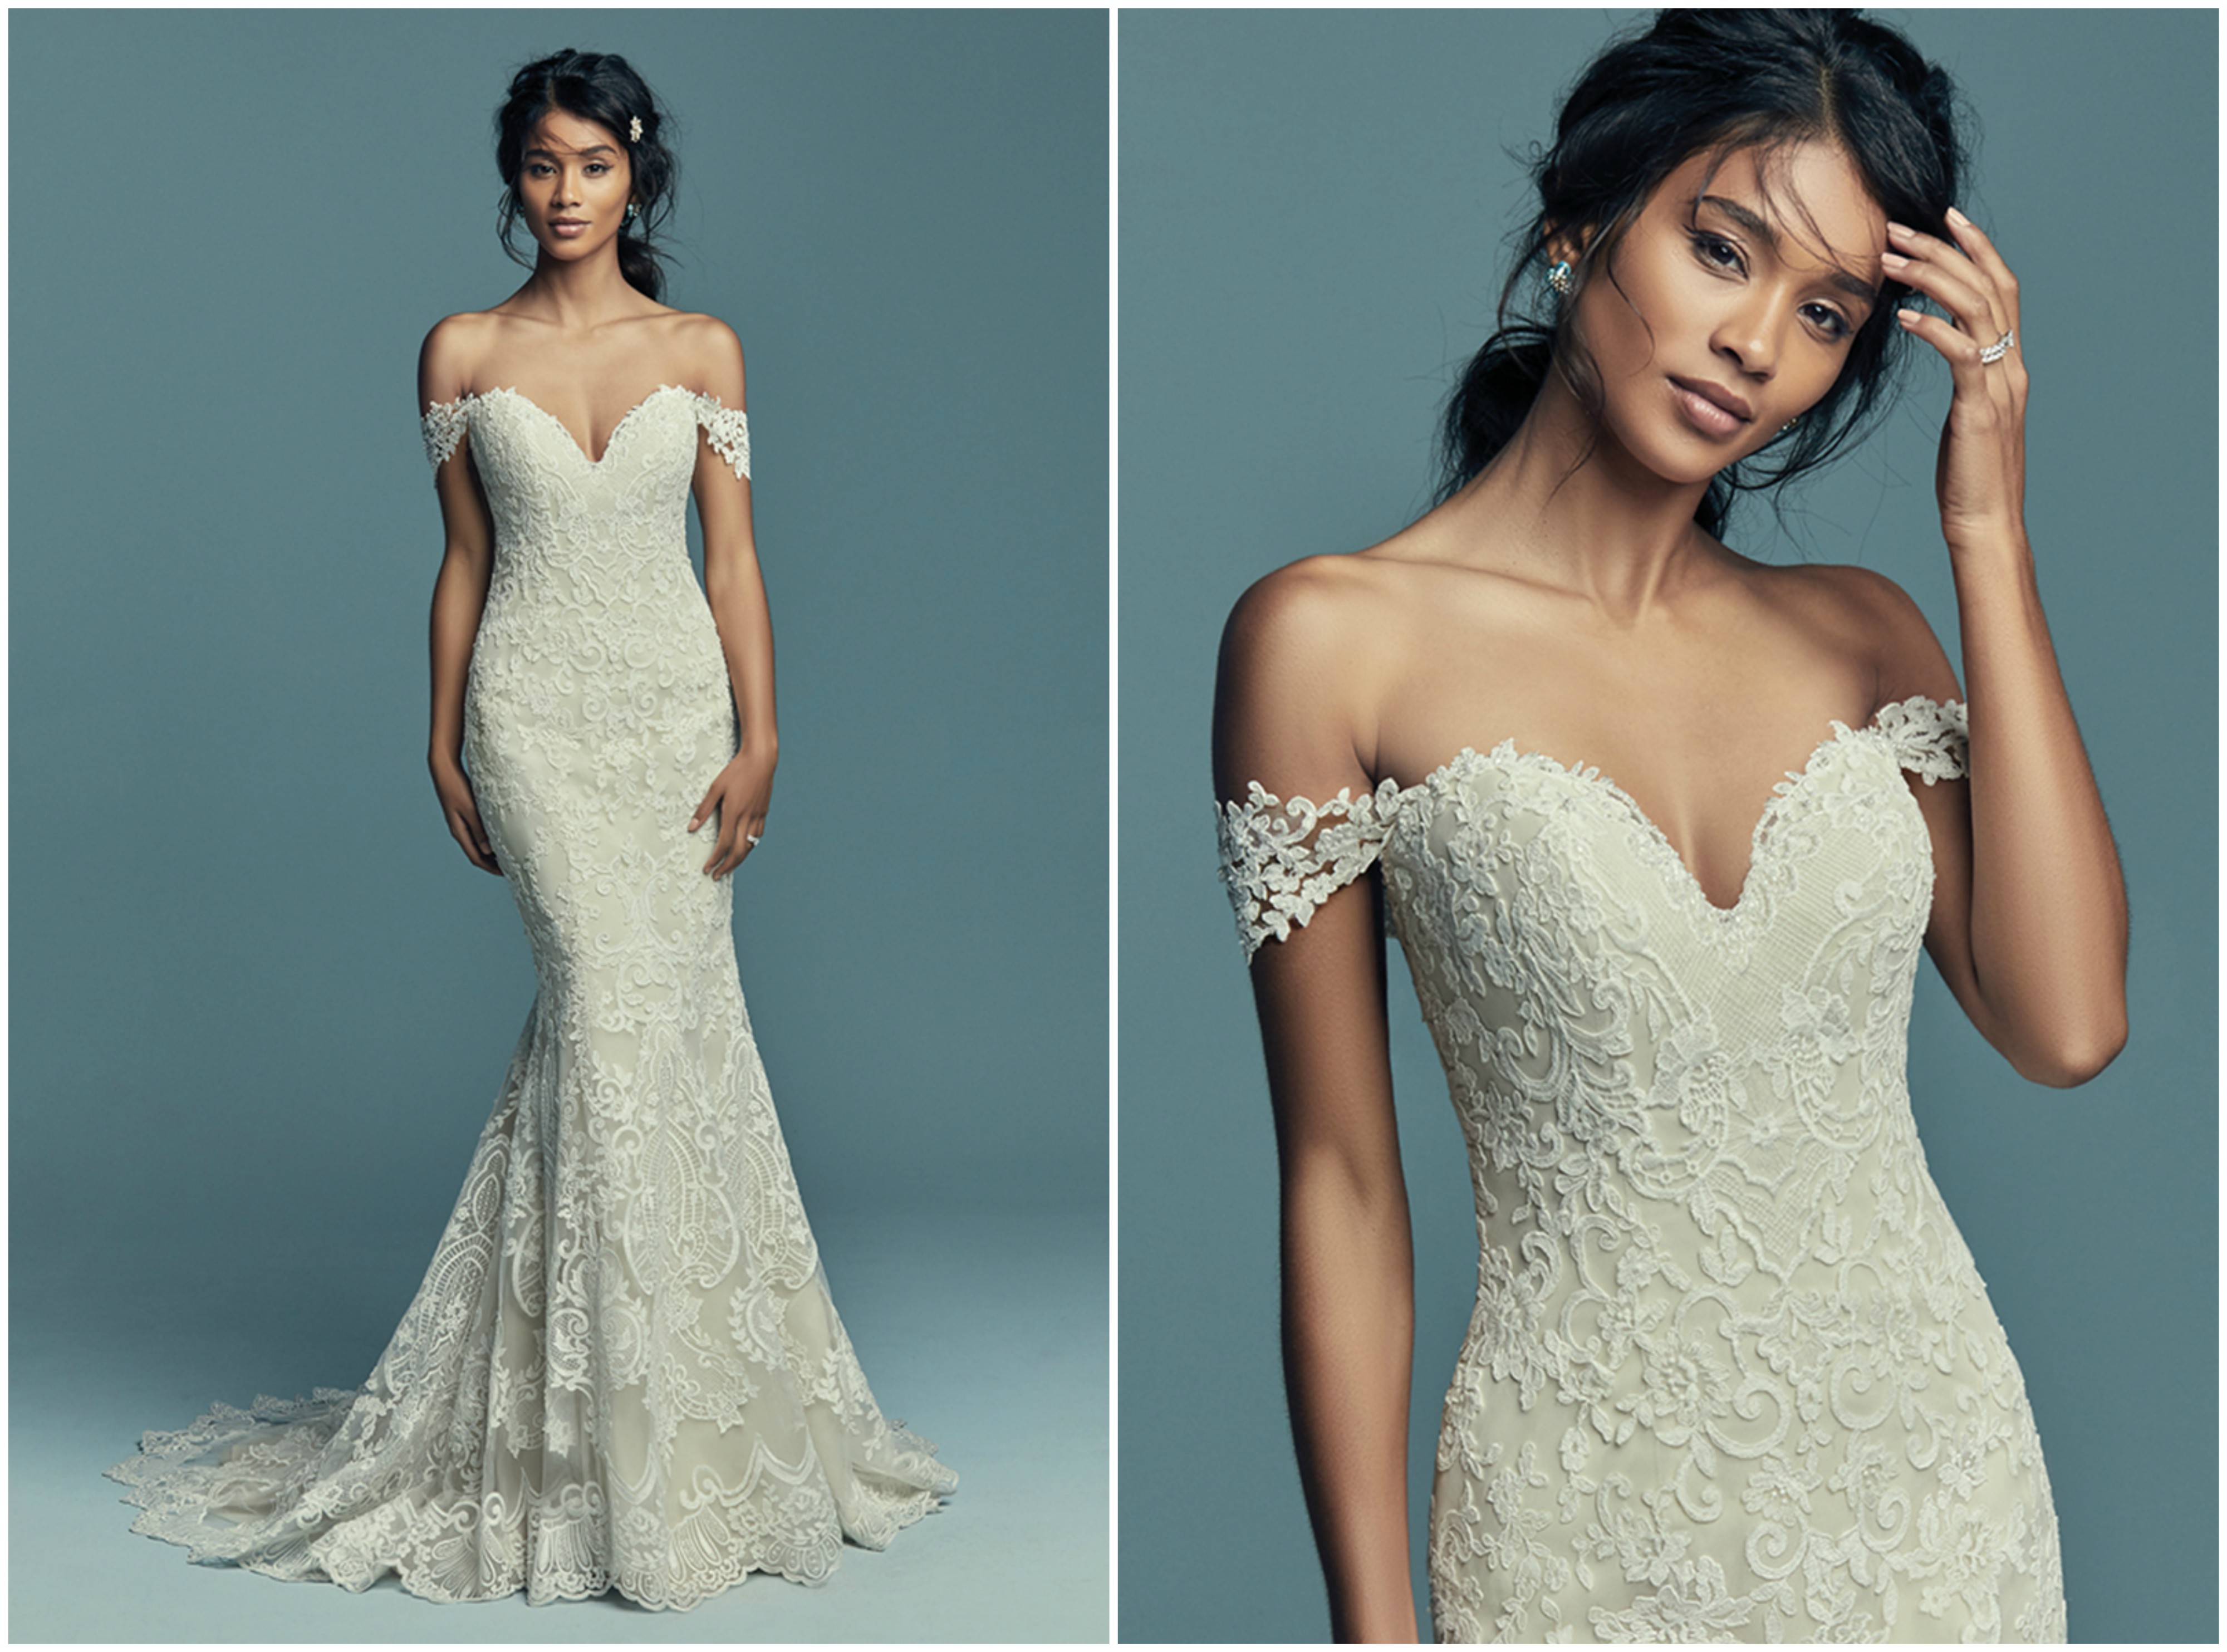 <a href="https://www.maggiesottero.com/maggie-sottero/stephanie/11435" target="_blank">Maggie Sottero</a>